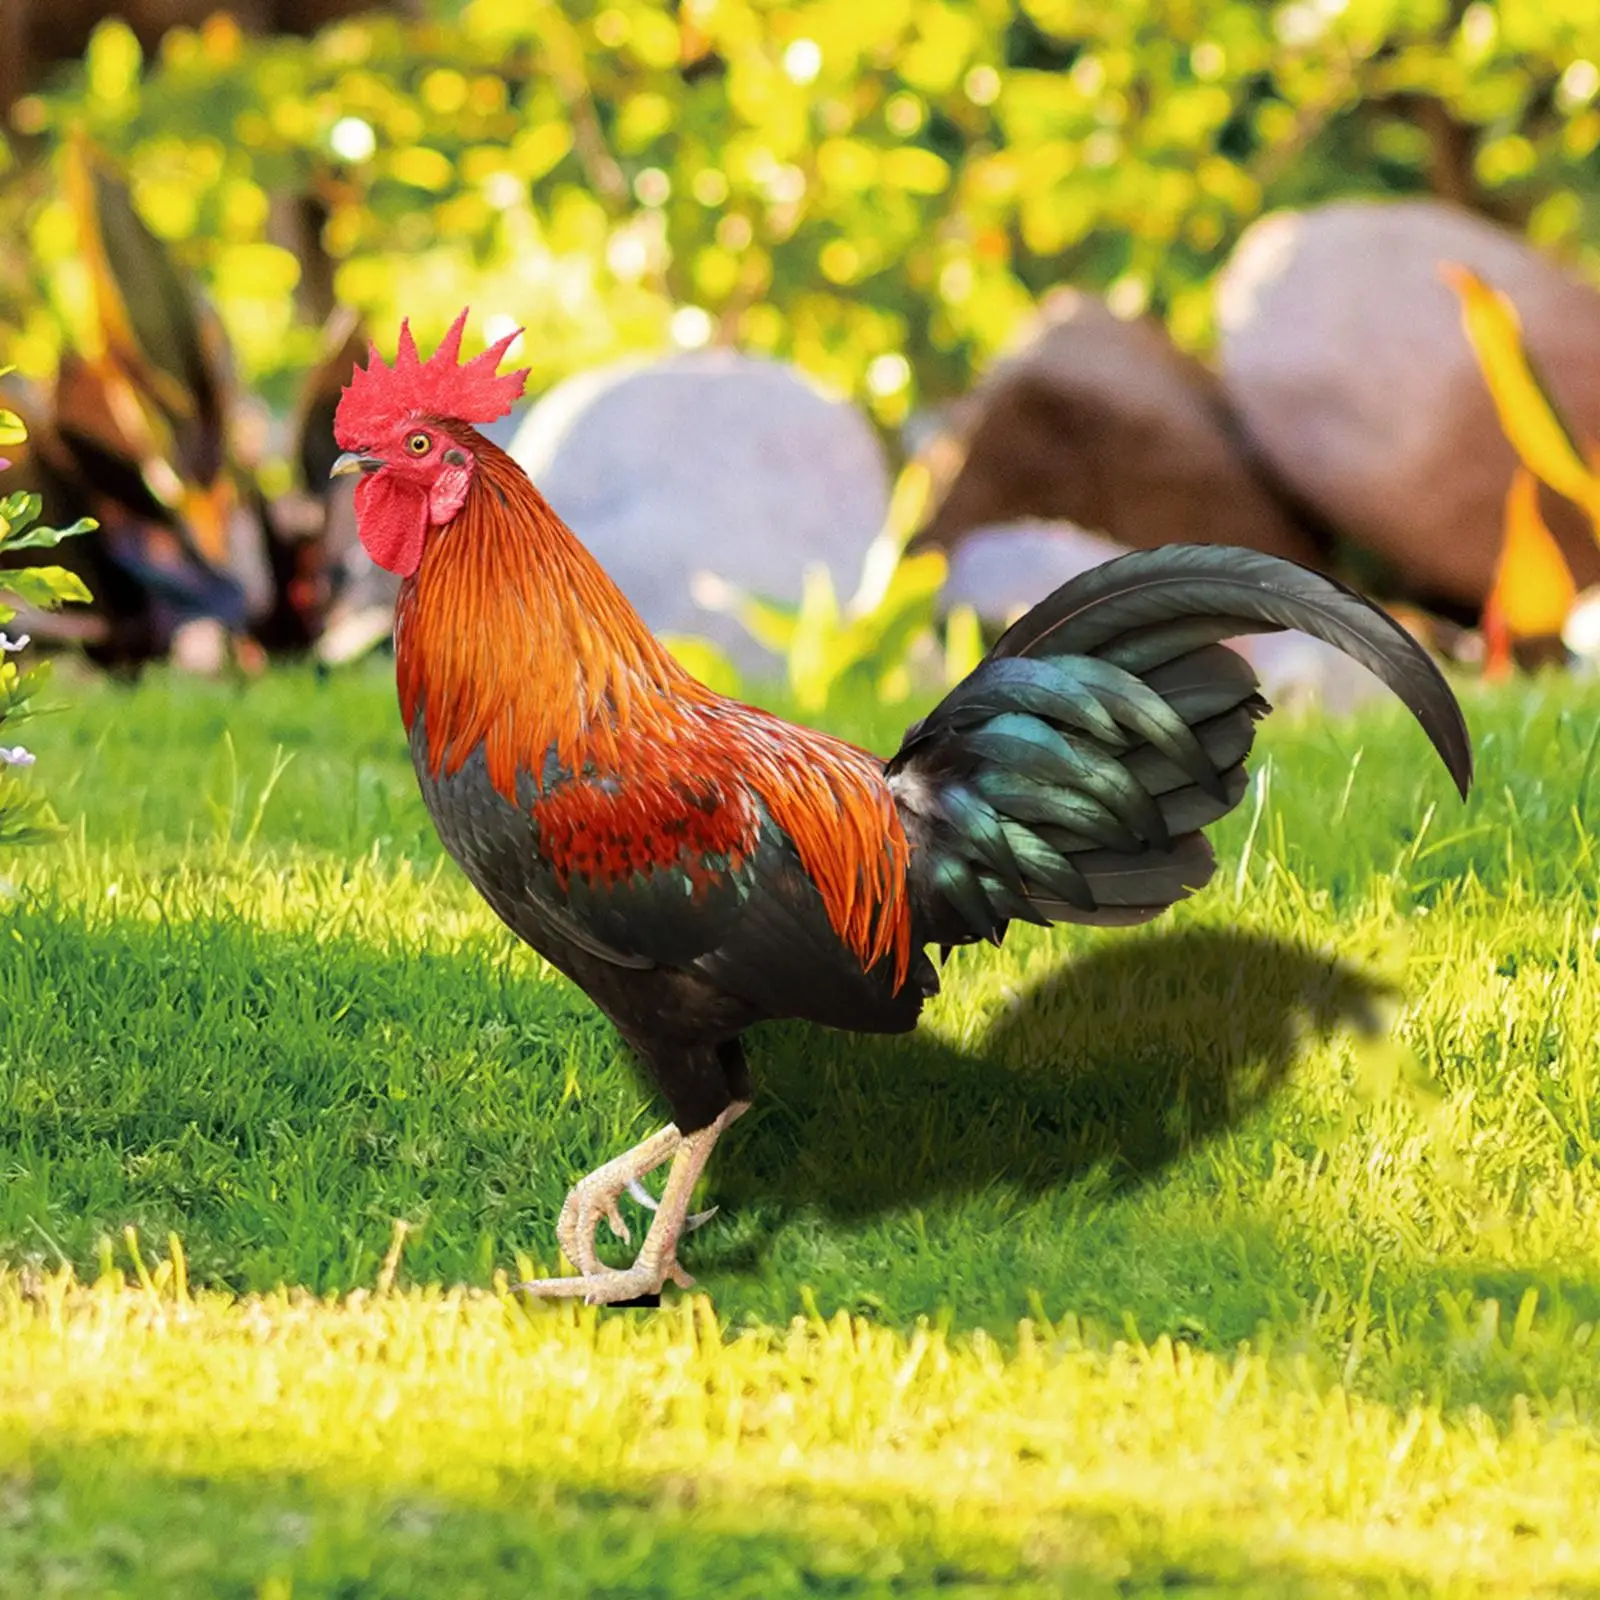 Rooster Animal Statue Ornament Garden Stakes Standing Yard Sign Decor for Courtyard Patio